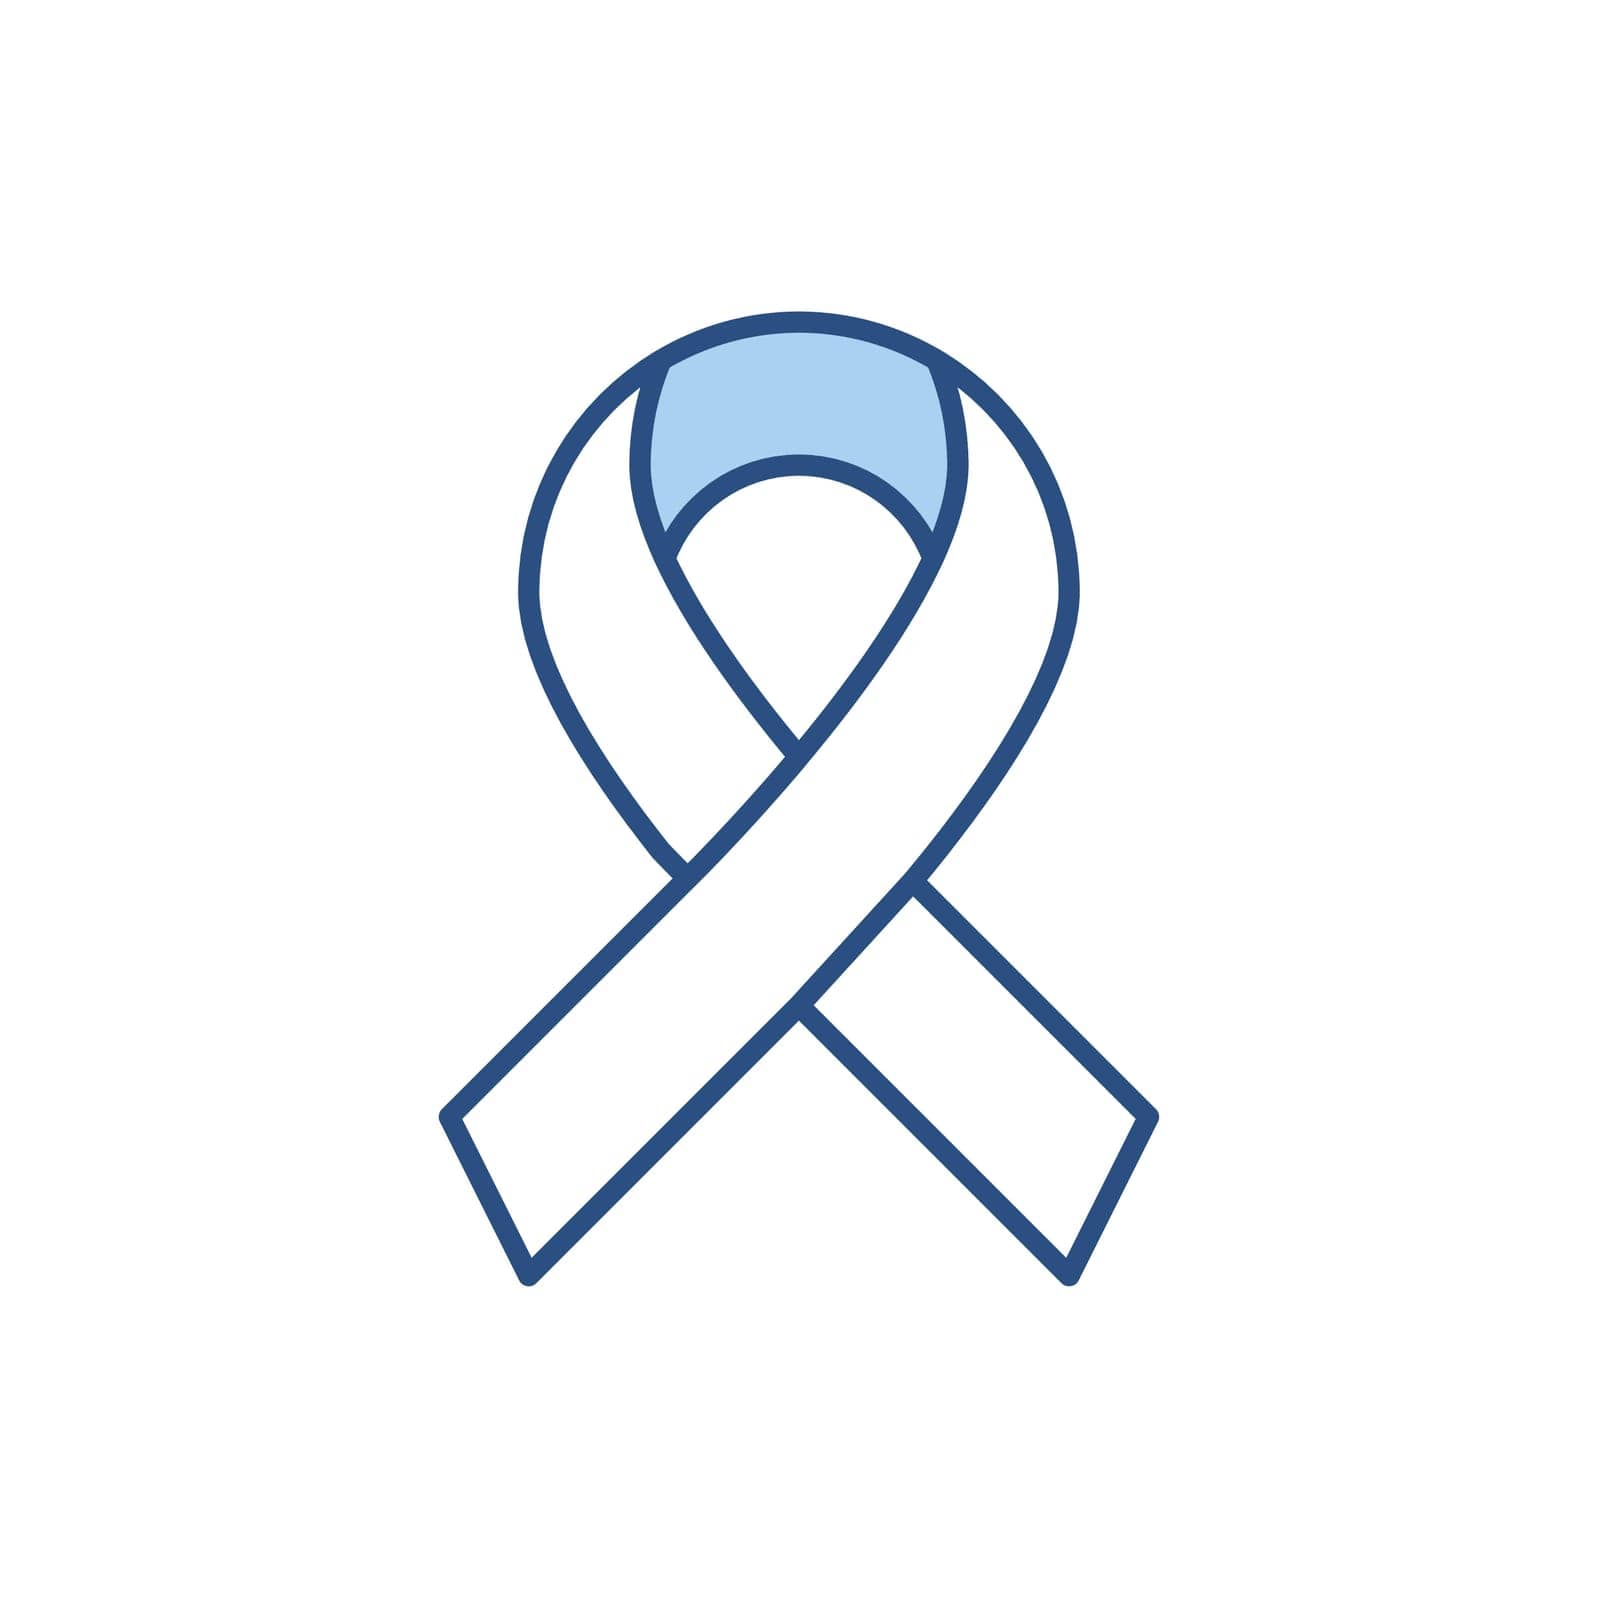 Hiv Ribbon, Cancer Concept Vector Icon. Isolated on the White Background. Editable EPS file. Vector illustration